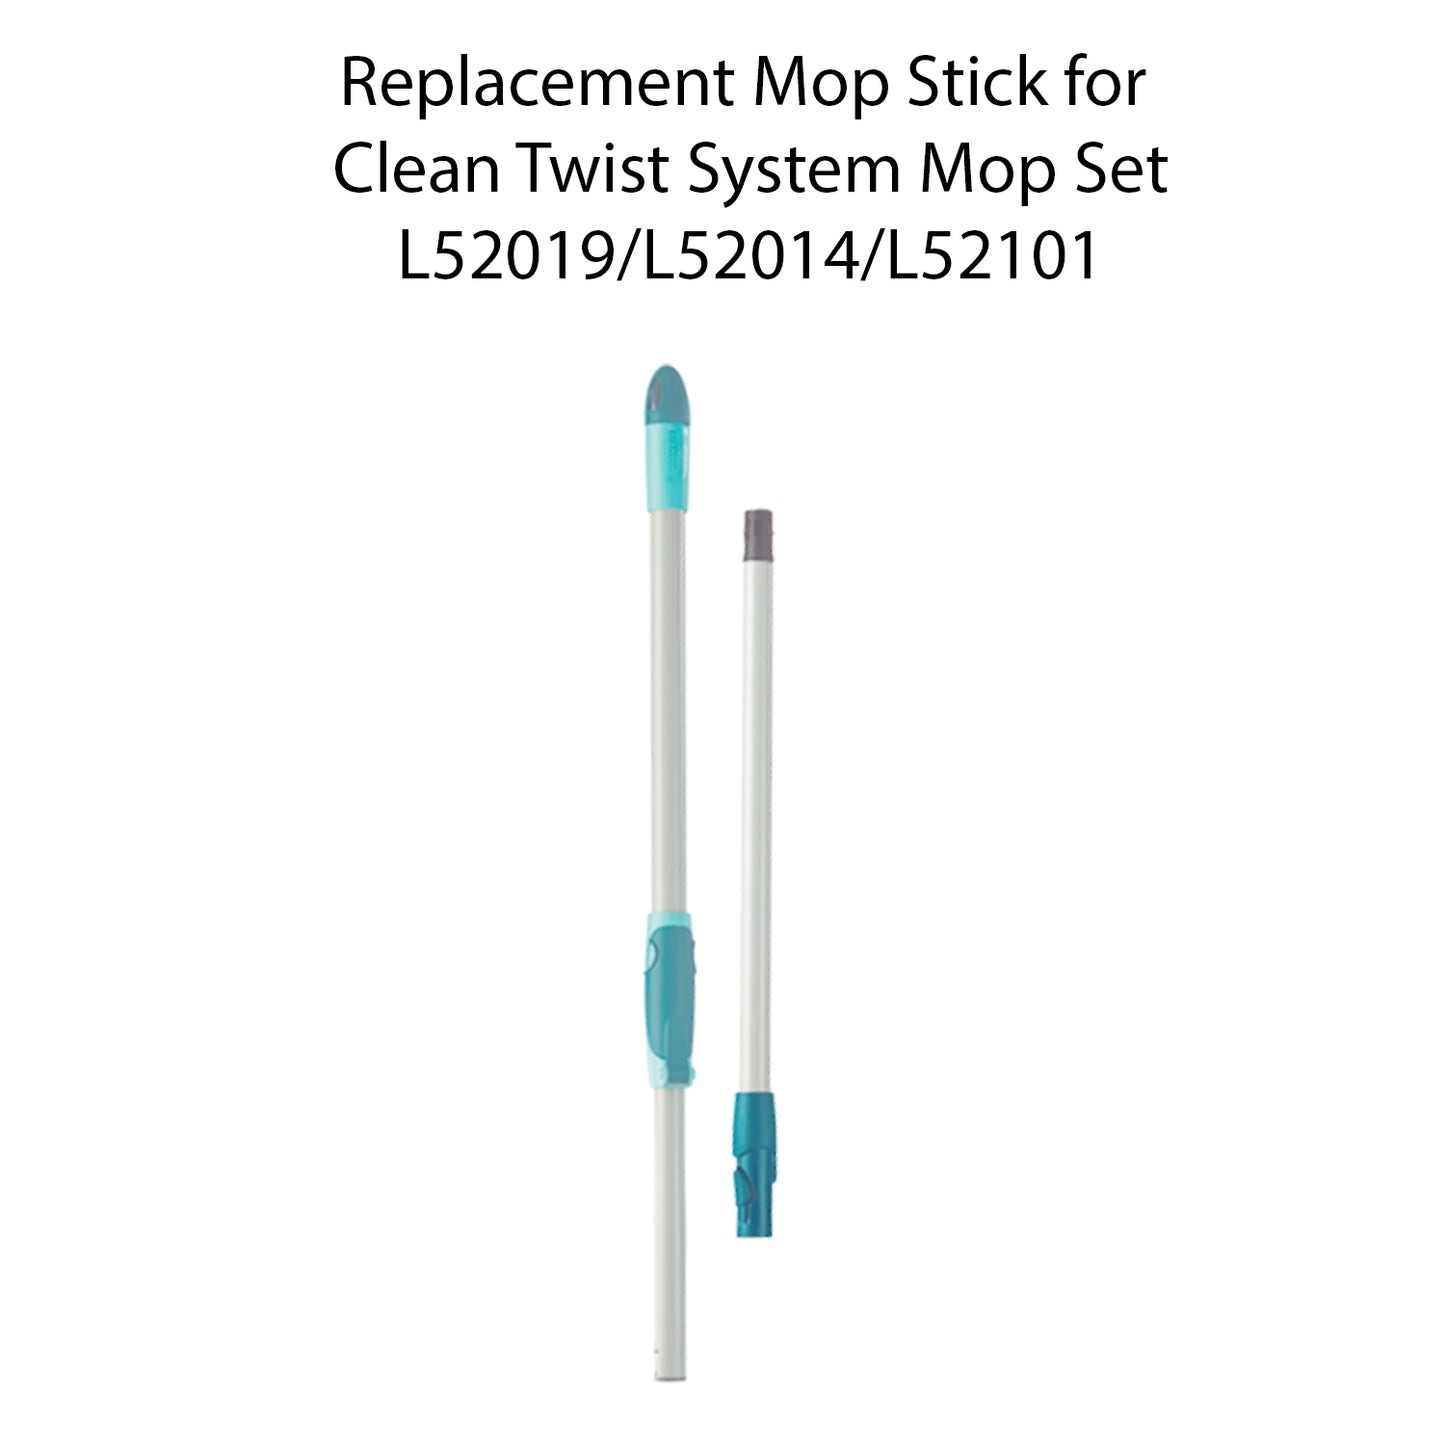 Replacement Mop Stick For L52019 Clean Twist Mop